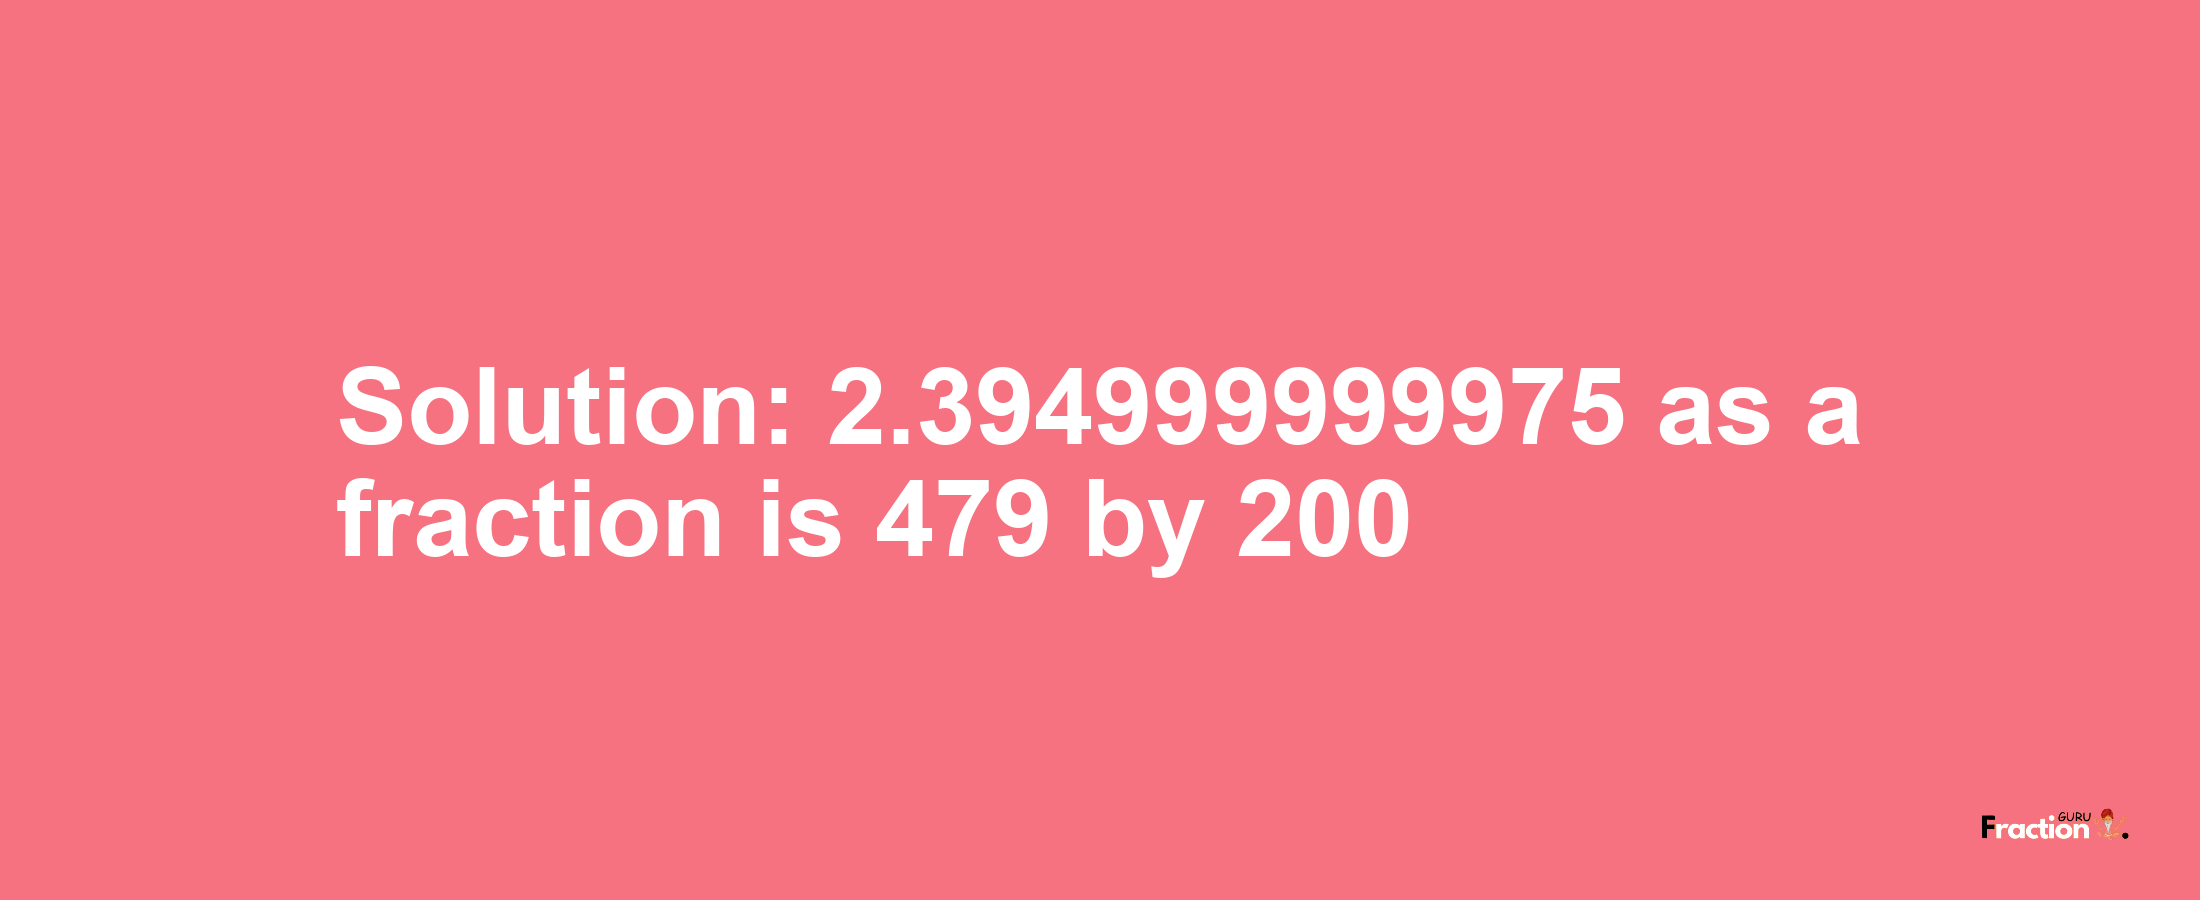 Solution:2.394999999975 as a fraction is 479/200